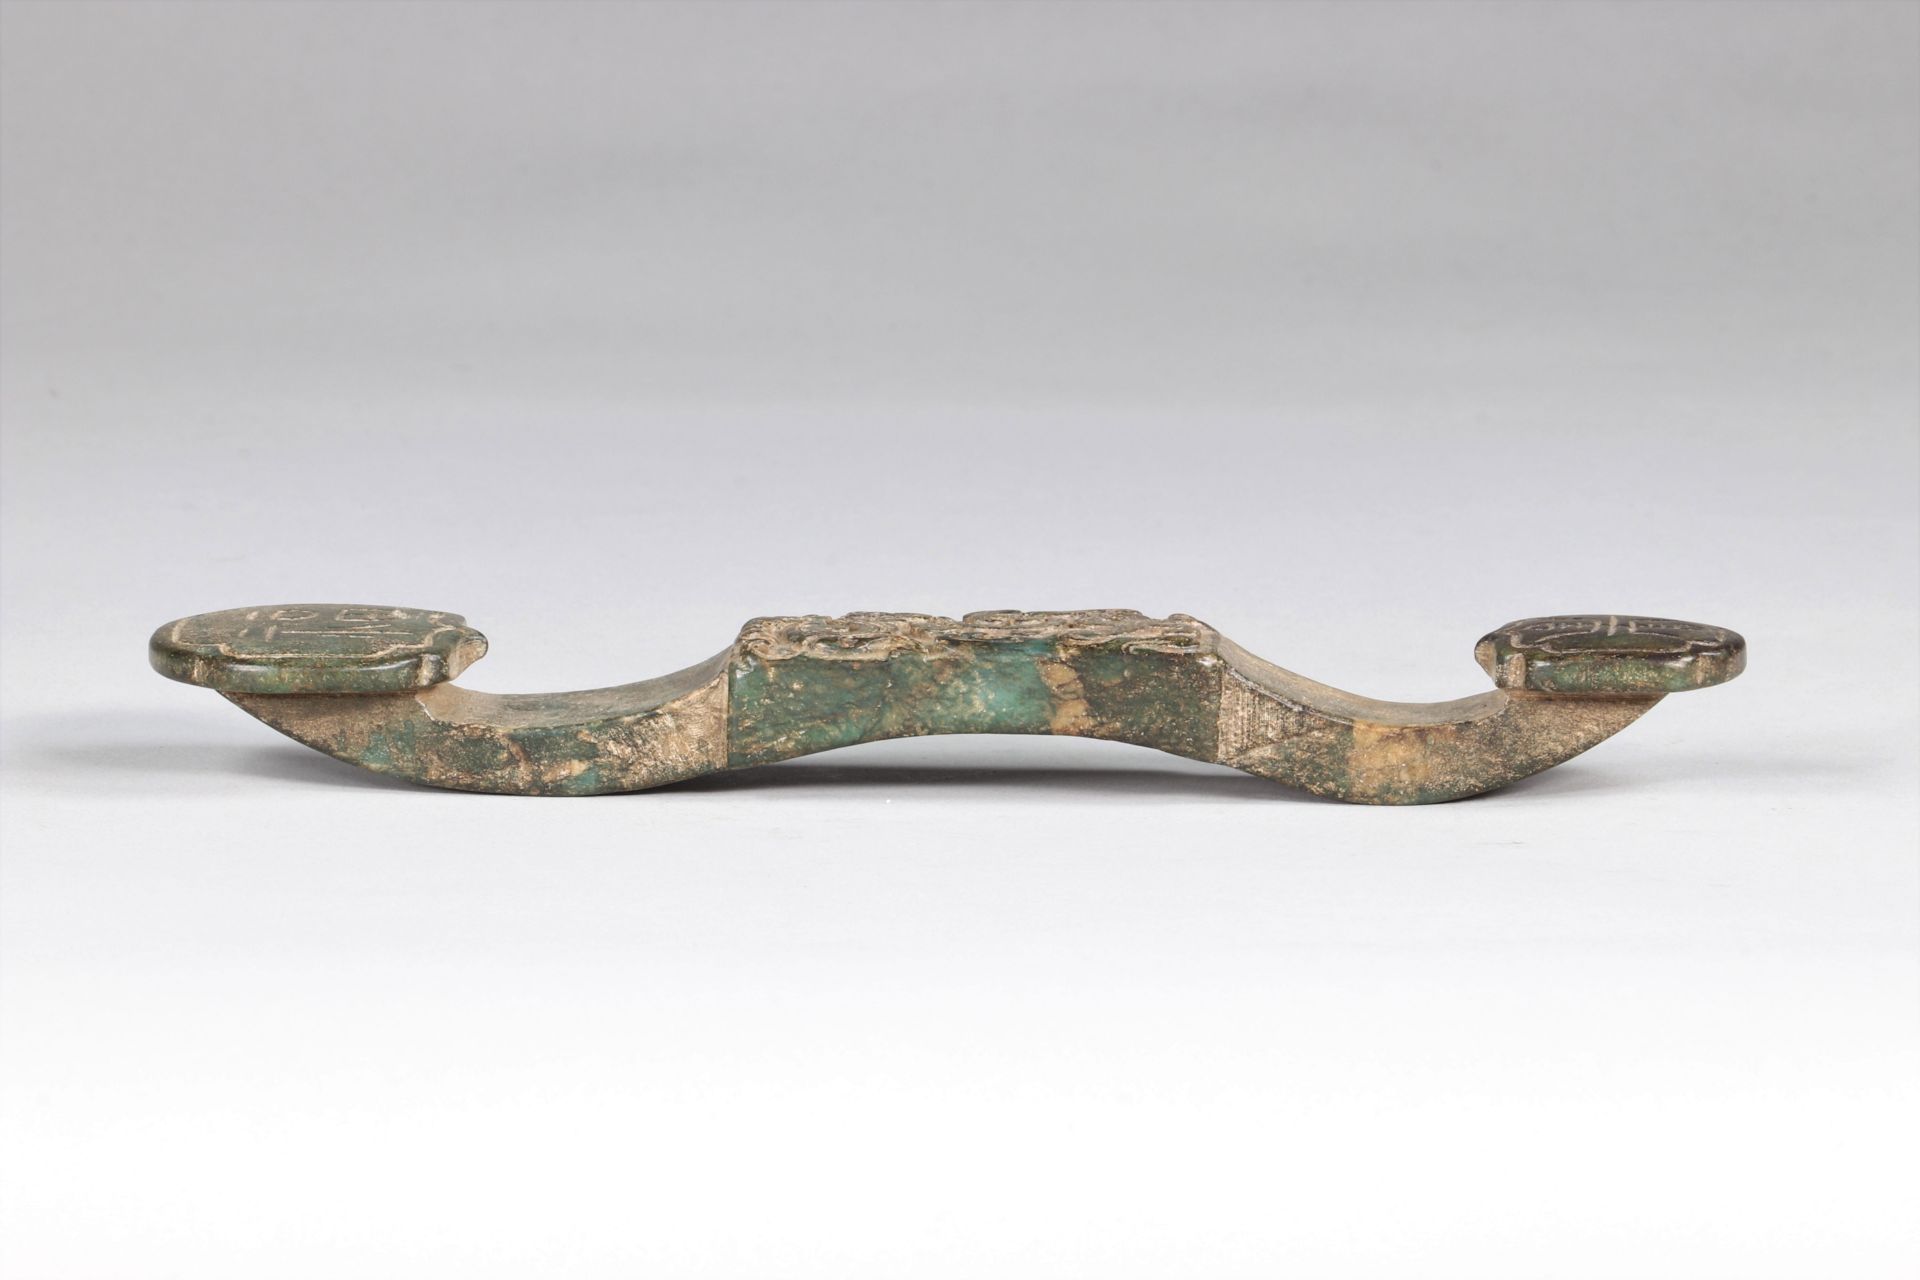 China archaic scepter in turquoise - Image 2 of 4